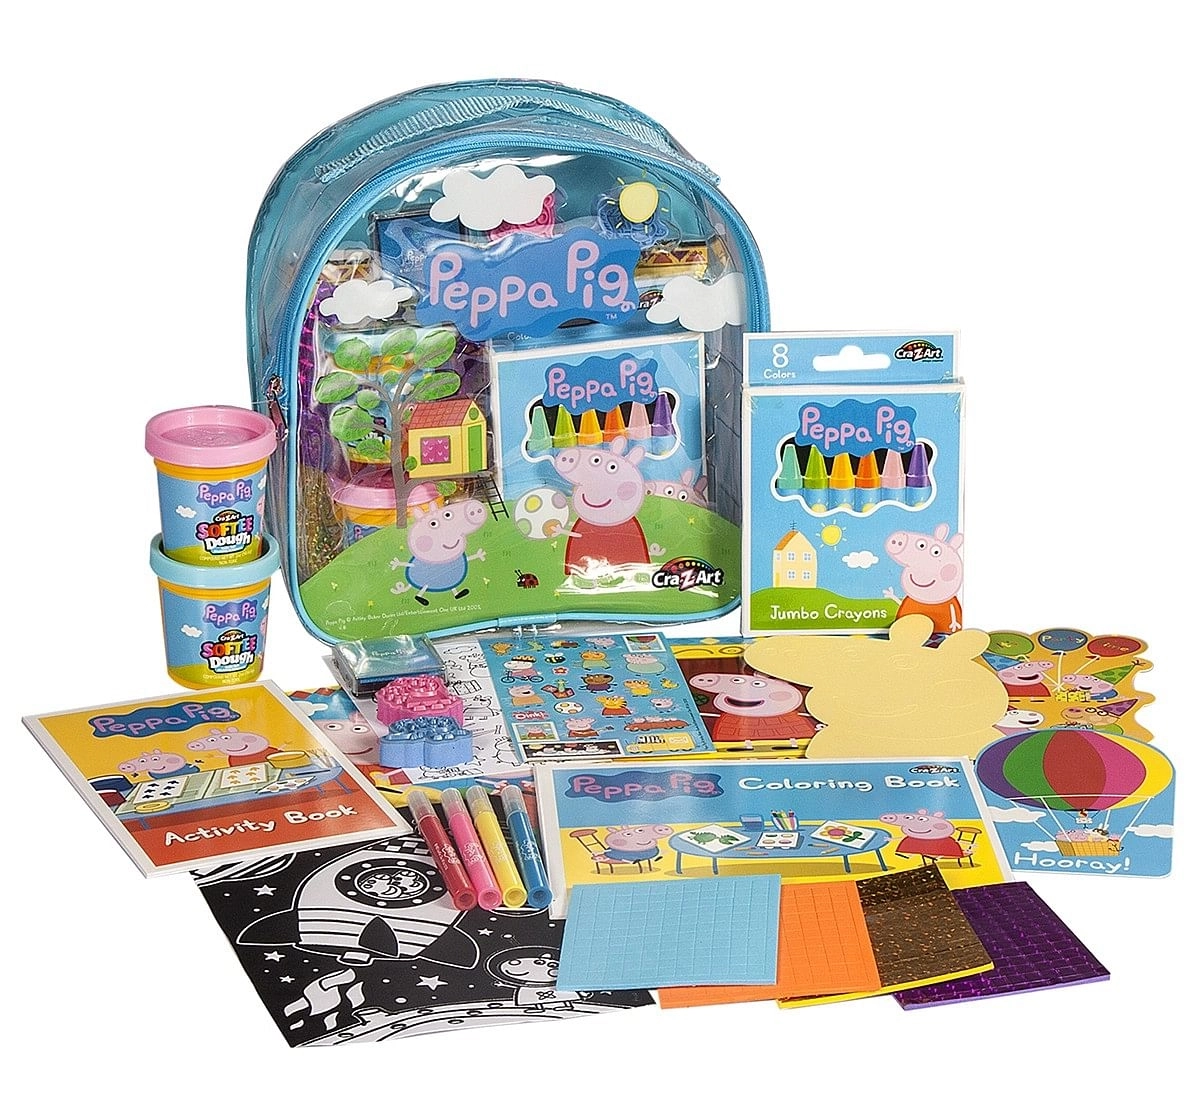 Peppa Pig - Softee Dough Ultimate Activities Backpack, assorted School Stationery for Kids age 3Y+ 